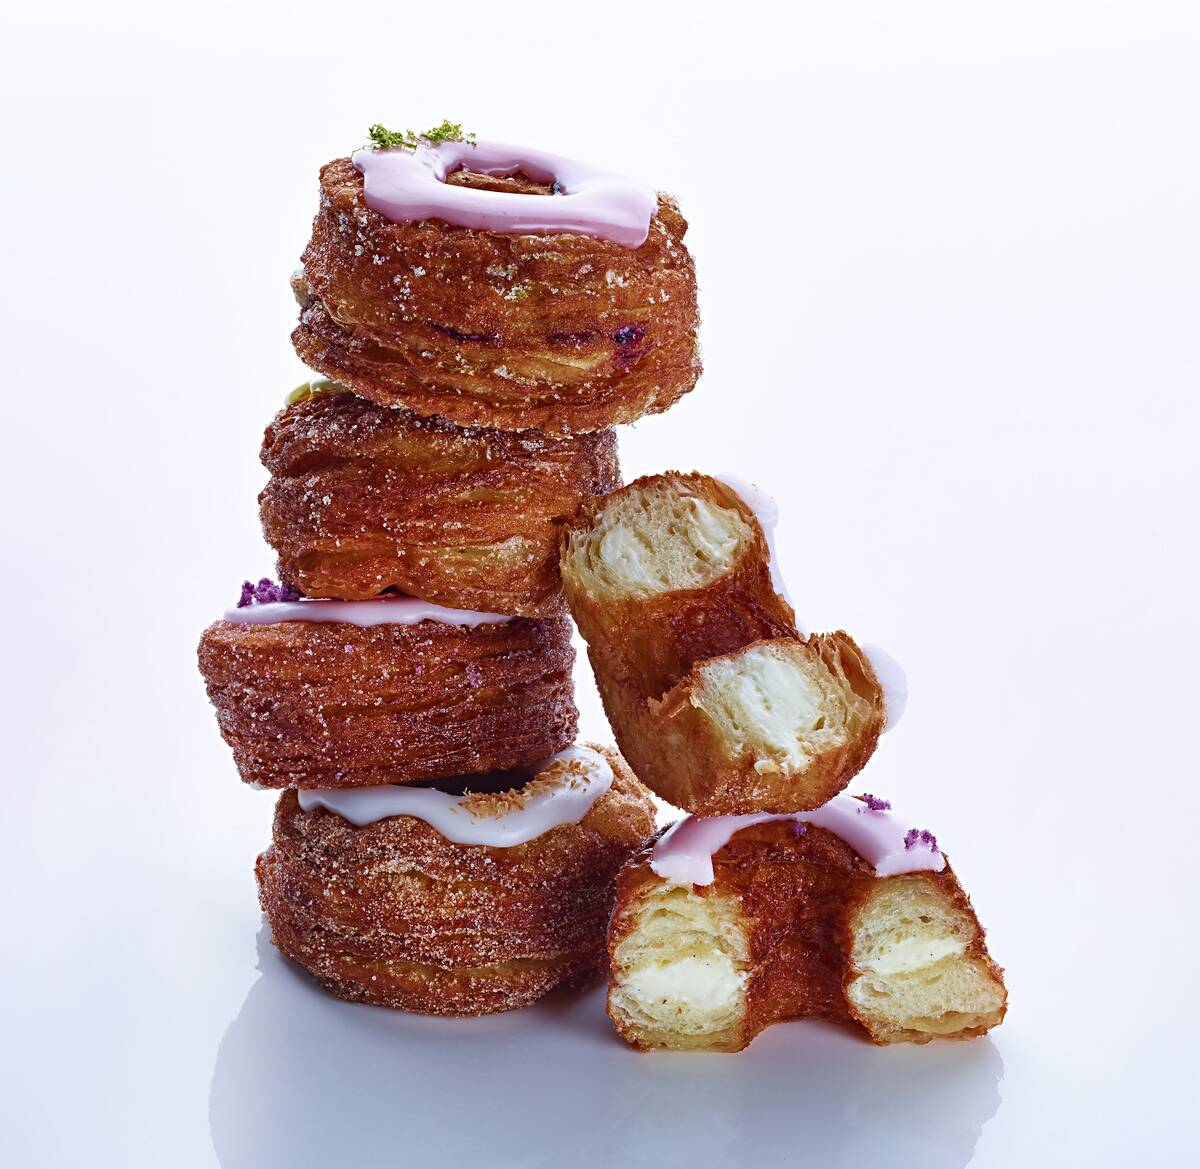 Ansel is perhaps most famous for the Cronut, which takes three days to make and is made in only ...